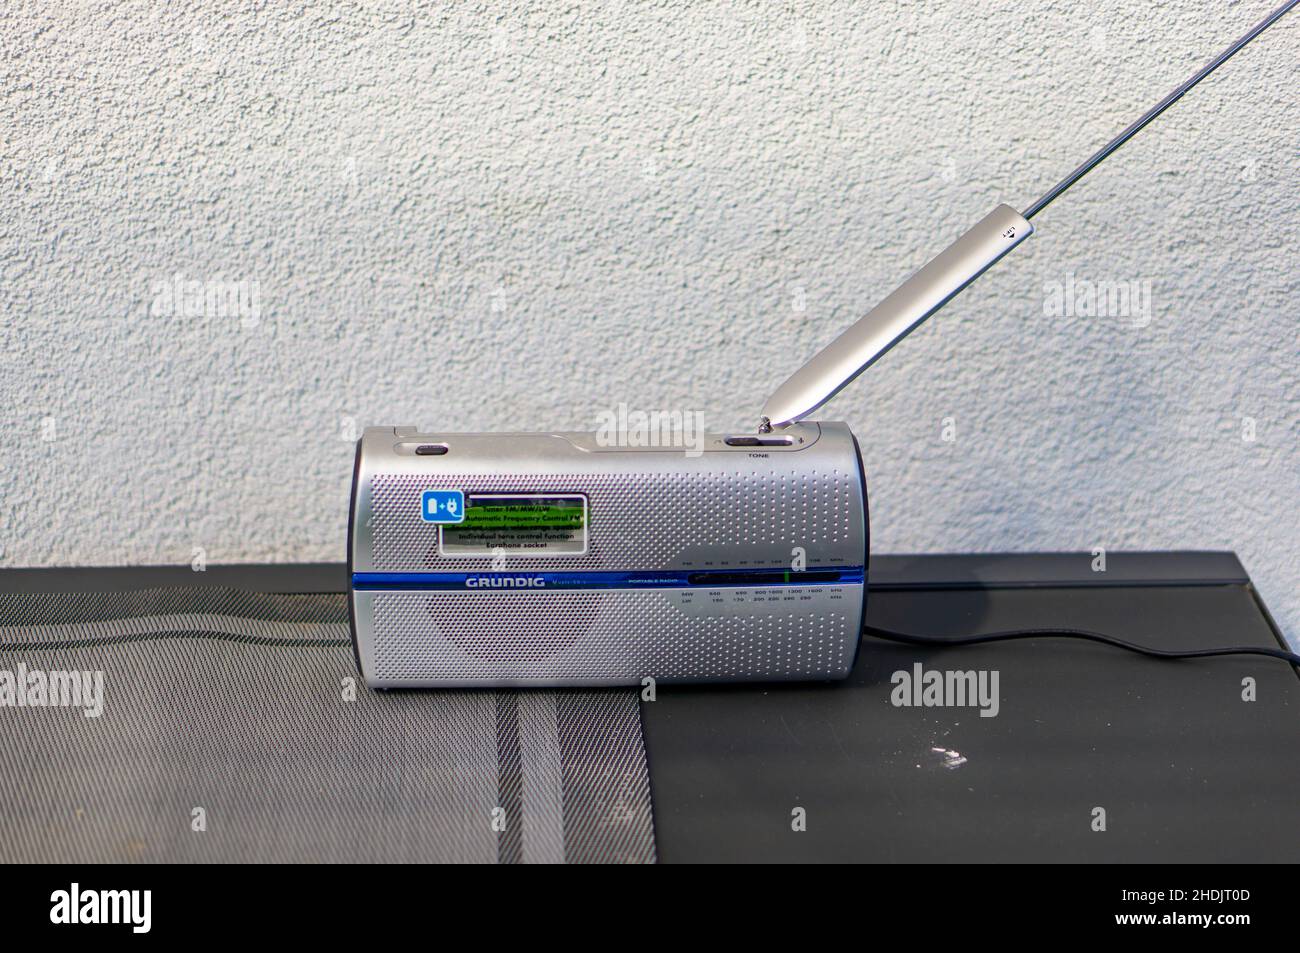 Grundig brand radio with an antenna on a table Stock Photo